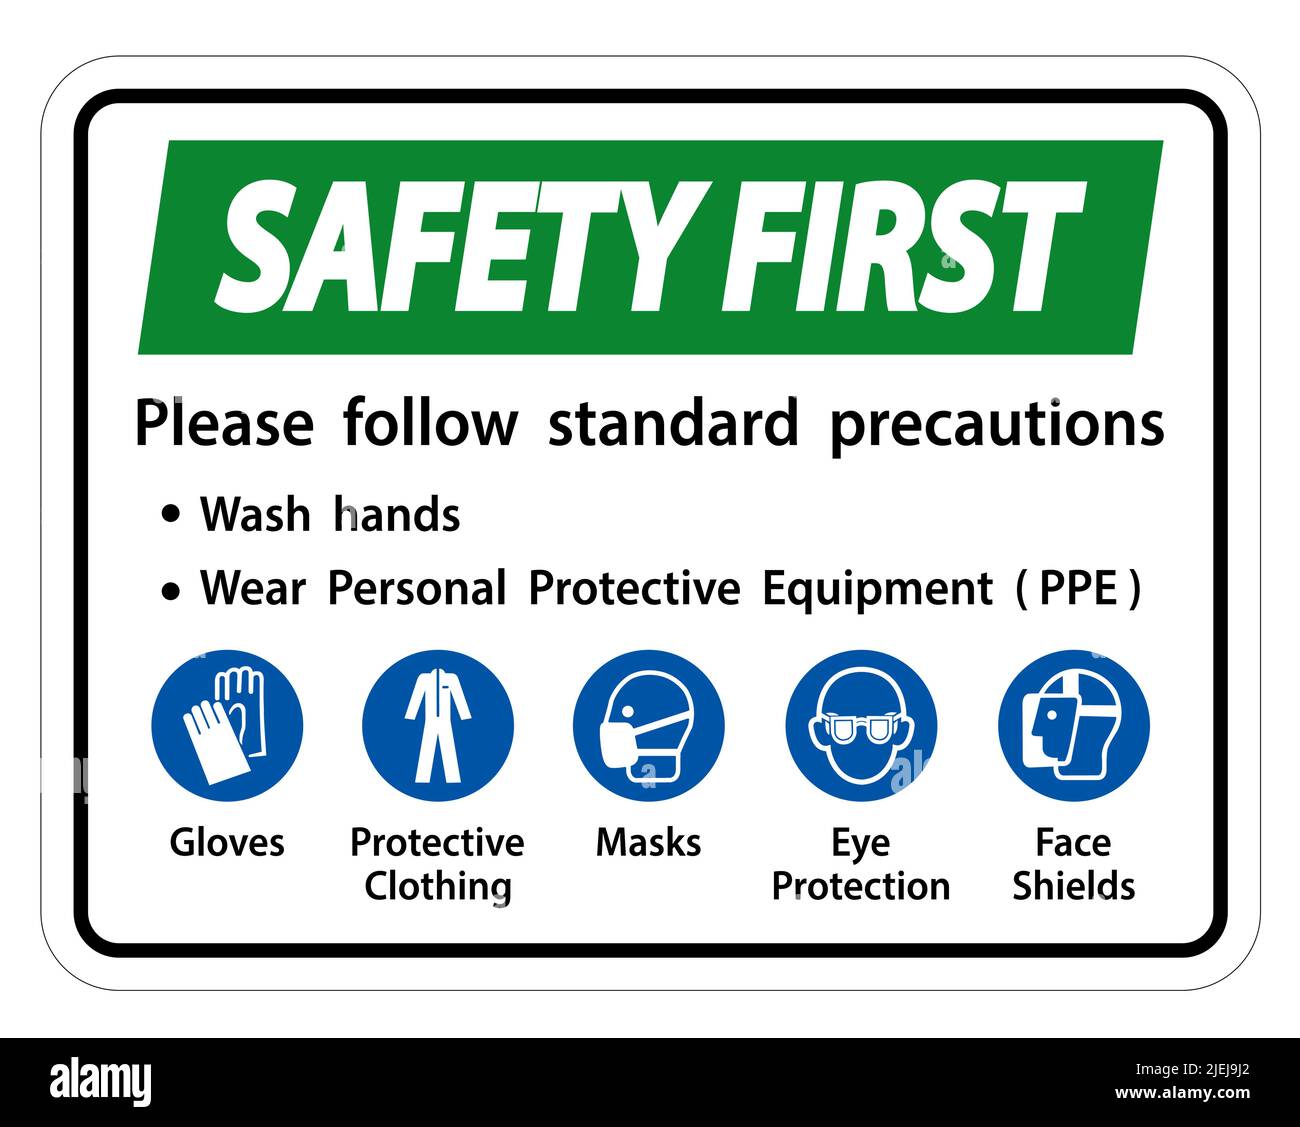 https://c8.alamy.com/comp/2JEJ9J2/safety-first-please-follow-standard-precautions-wash-handswear-personal-protective-equipment-ppegloves-protective-clothing-masks-eye-protection-fac-2JEJ9J2.jpg